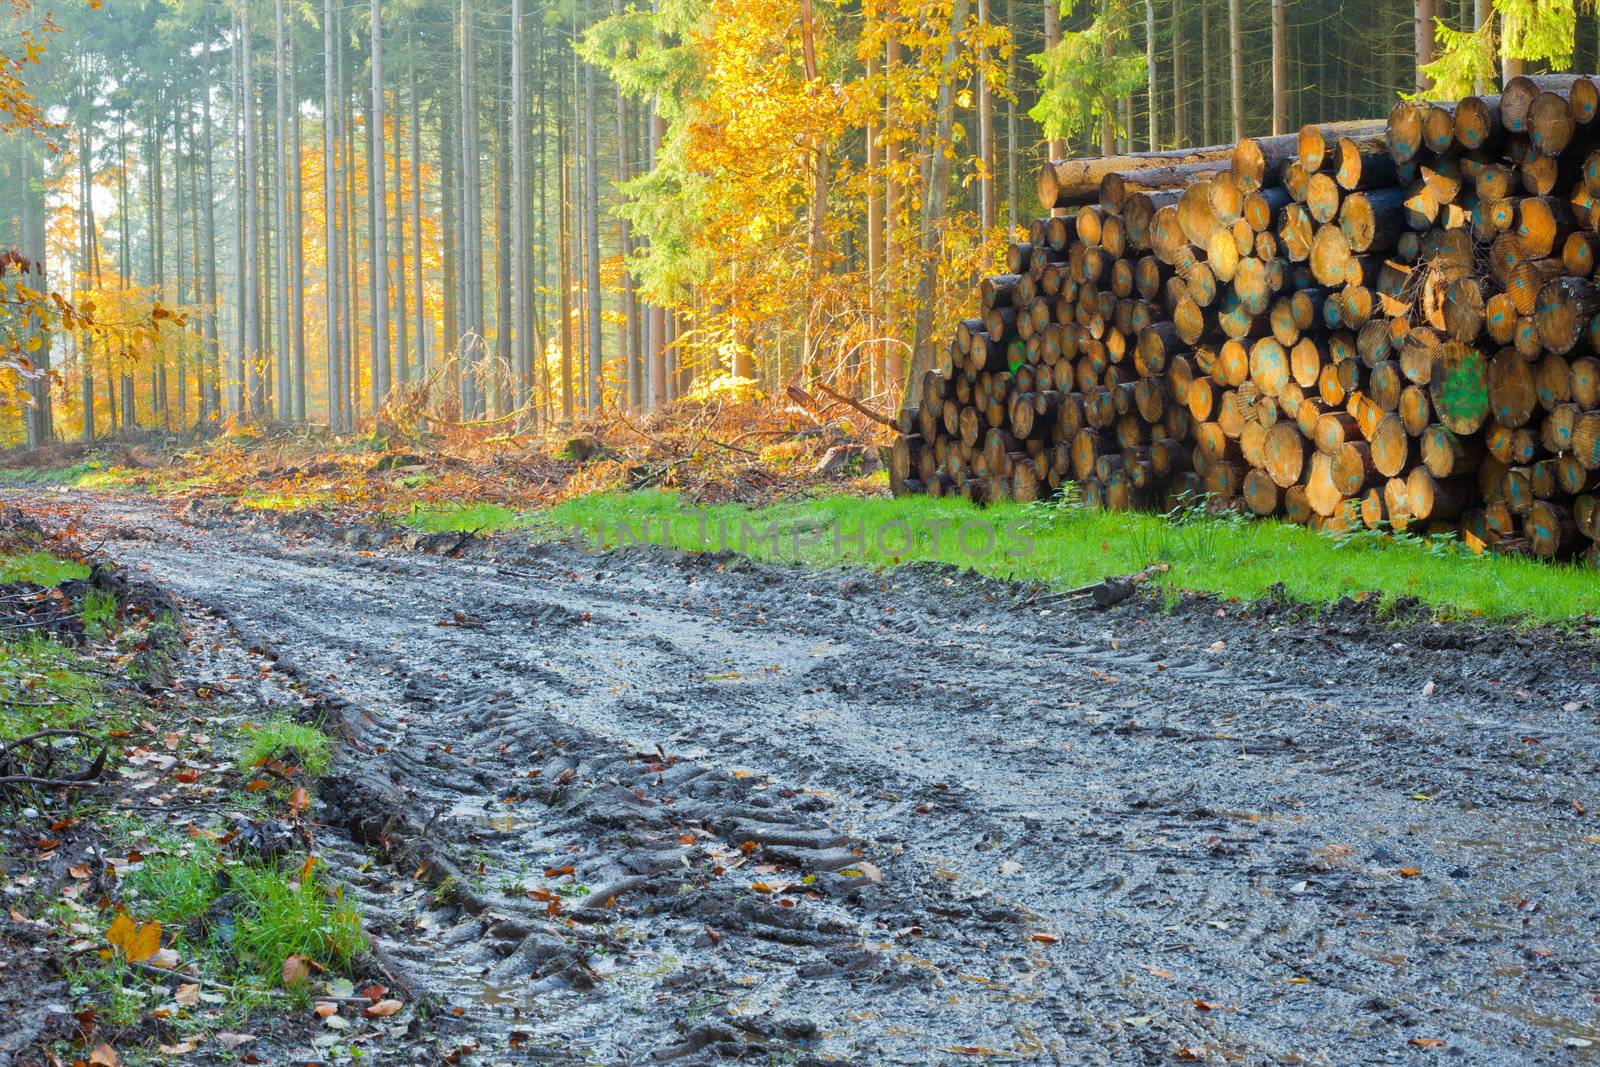 Renewable resource forest ready to harvest: deep machinery markings in mud and pile of logs.